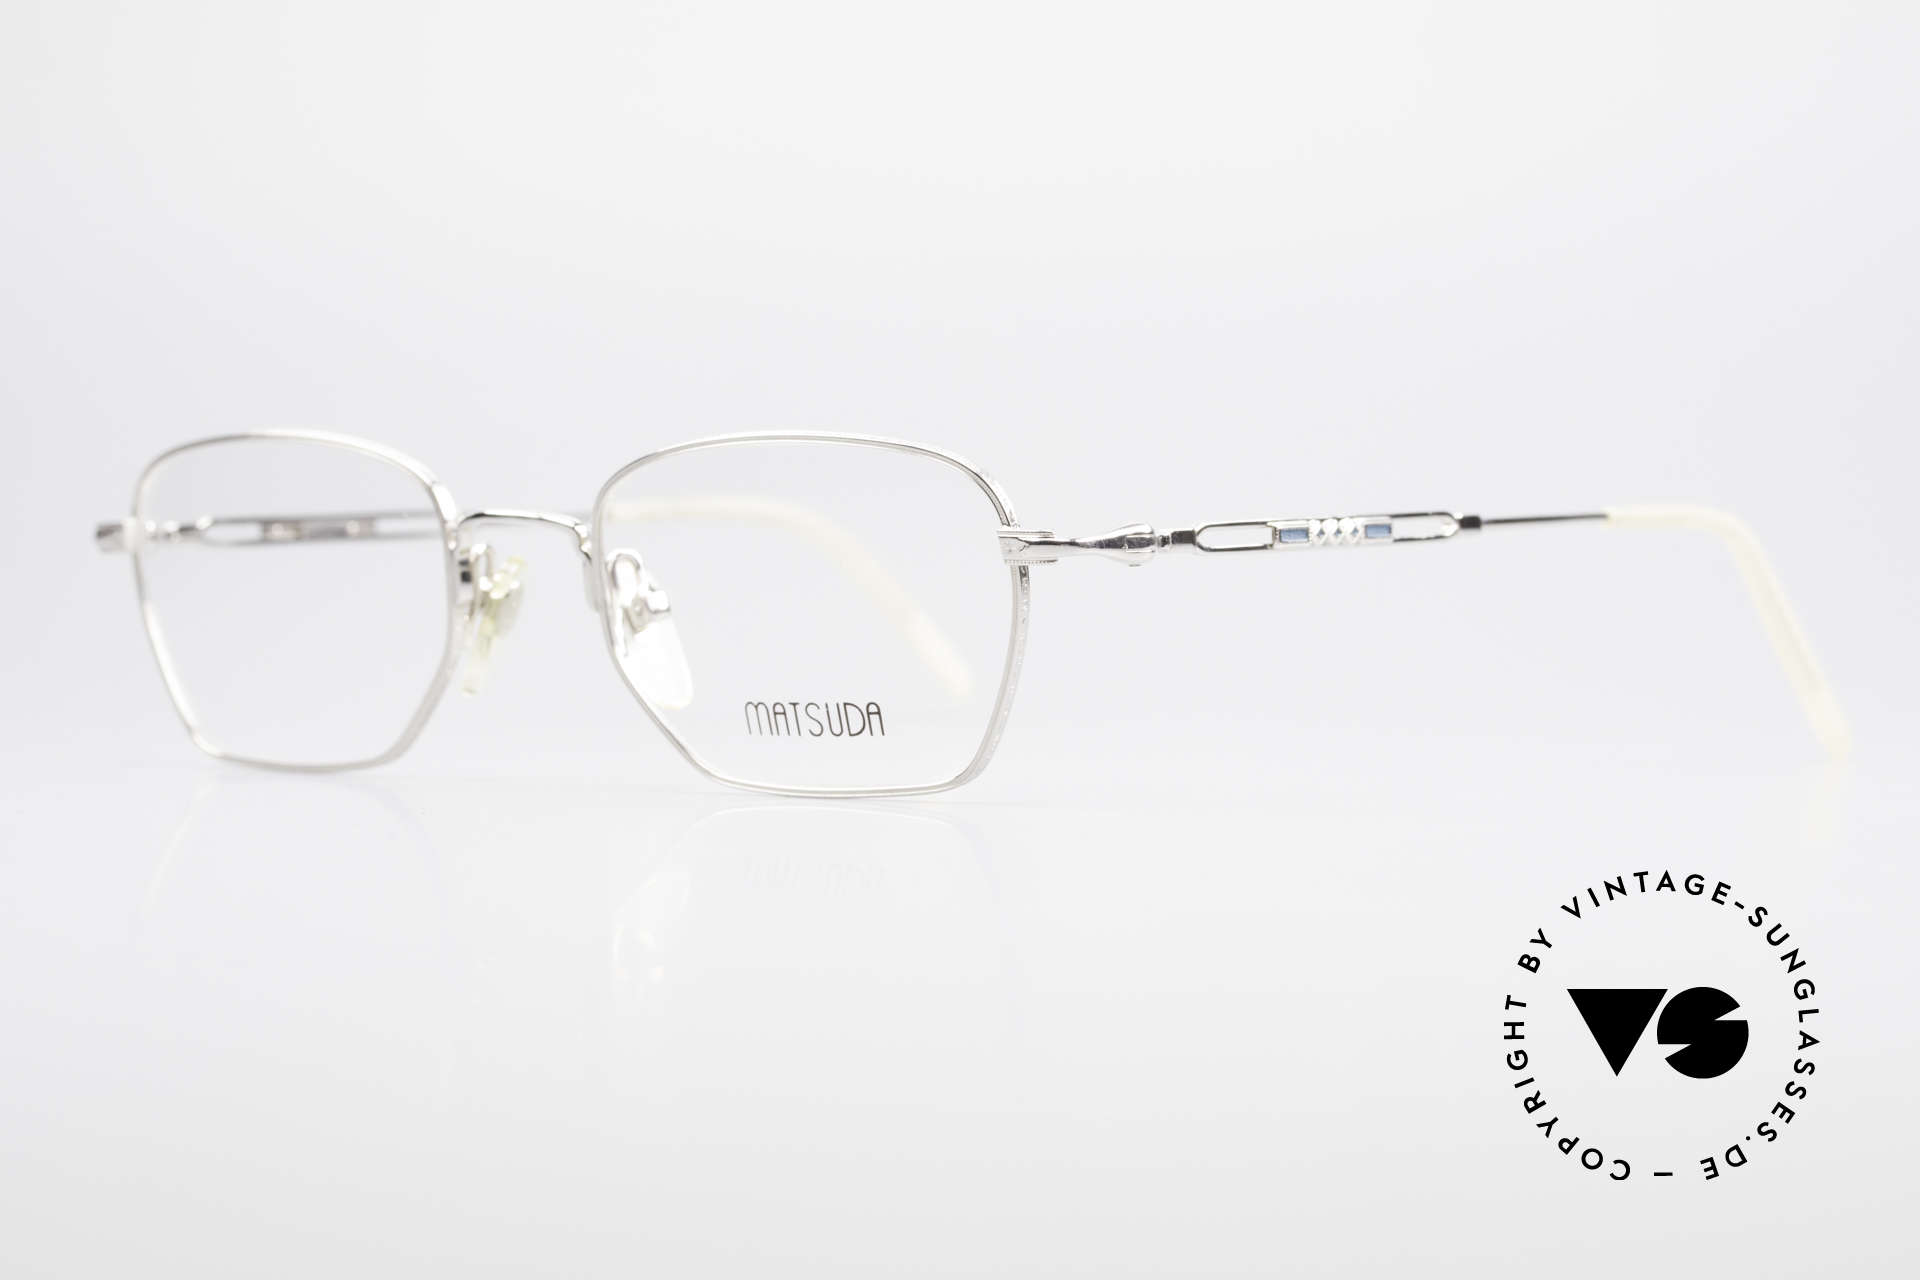 Matsuda 2882 Vintage Eyeglasses Square, the full frame is decorated with costly engravings, Made for Men